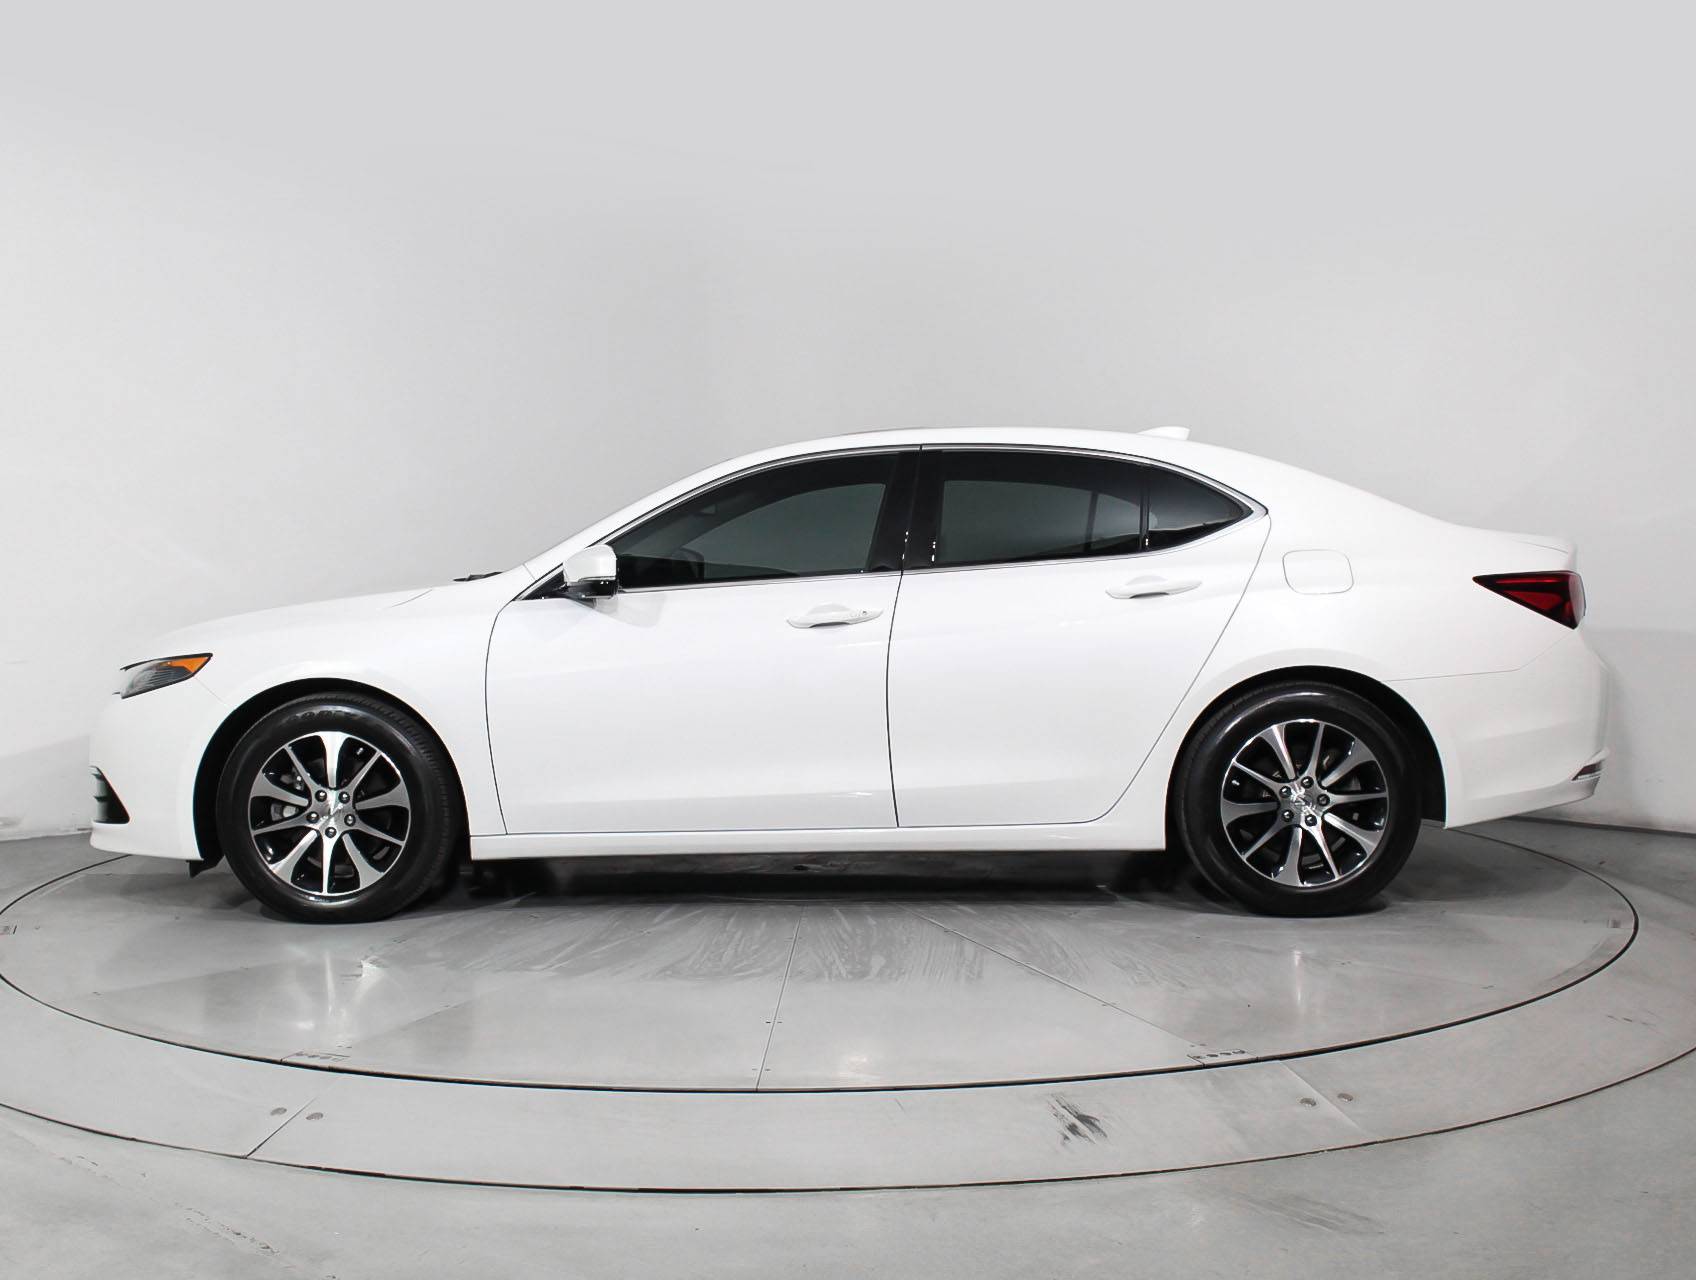 Used 2015 Acura Tlx Sedan For Sale In Hollywood Fl 91029